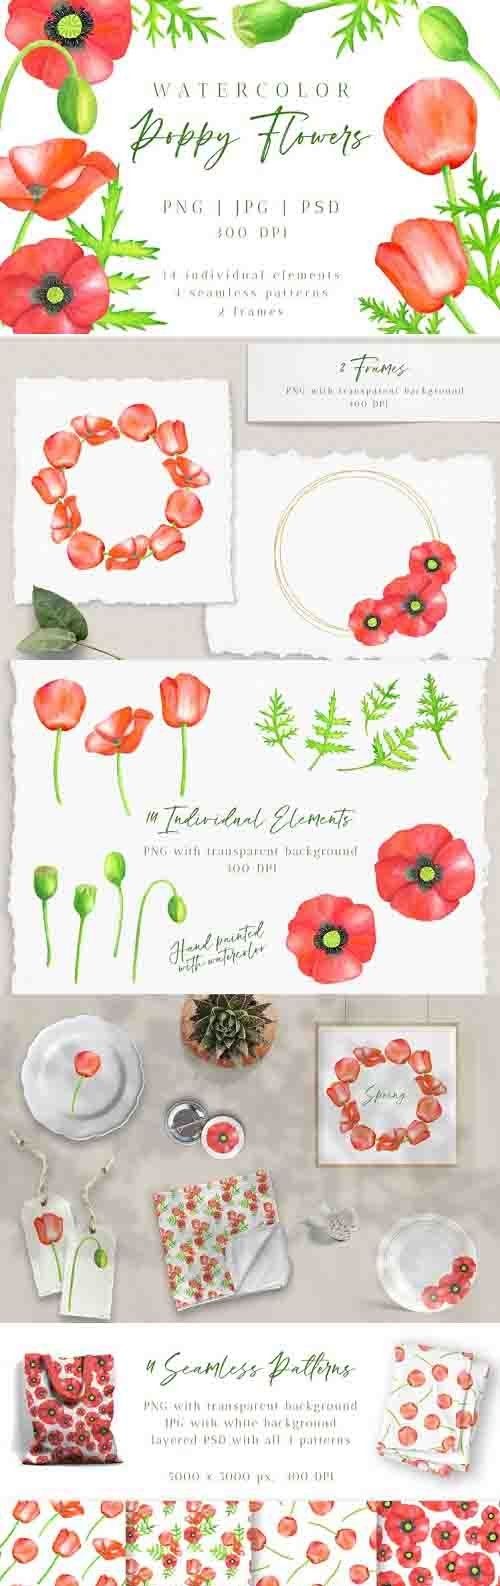 Red Poppy Flowers Clipart. Watercolor Floral PNG Collection - 1231936